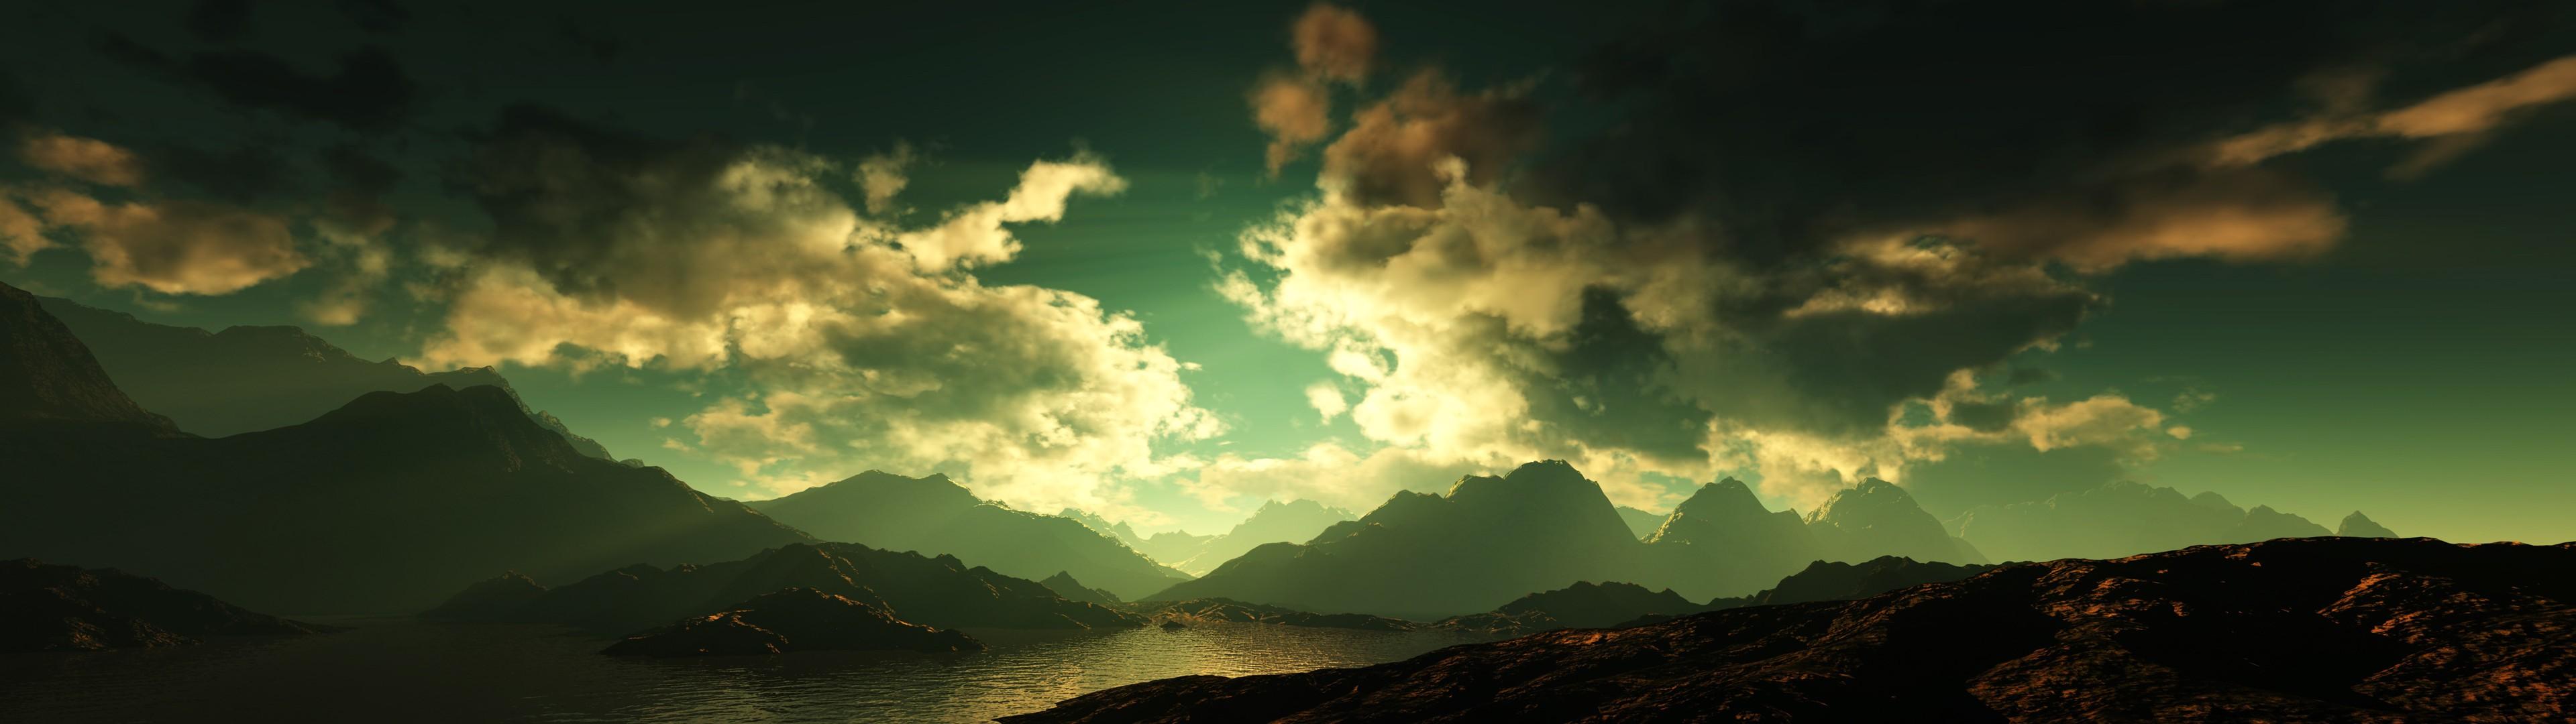 3840 x 1080 · jpeg - Dual Monitor background 1 Download free awesome High Resolution ...